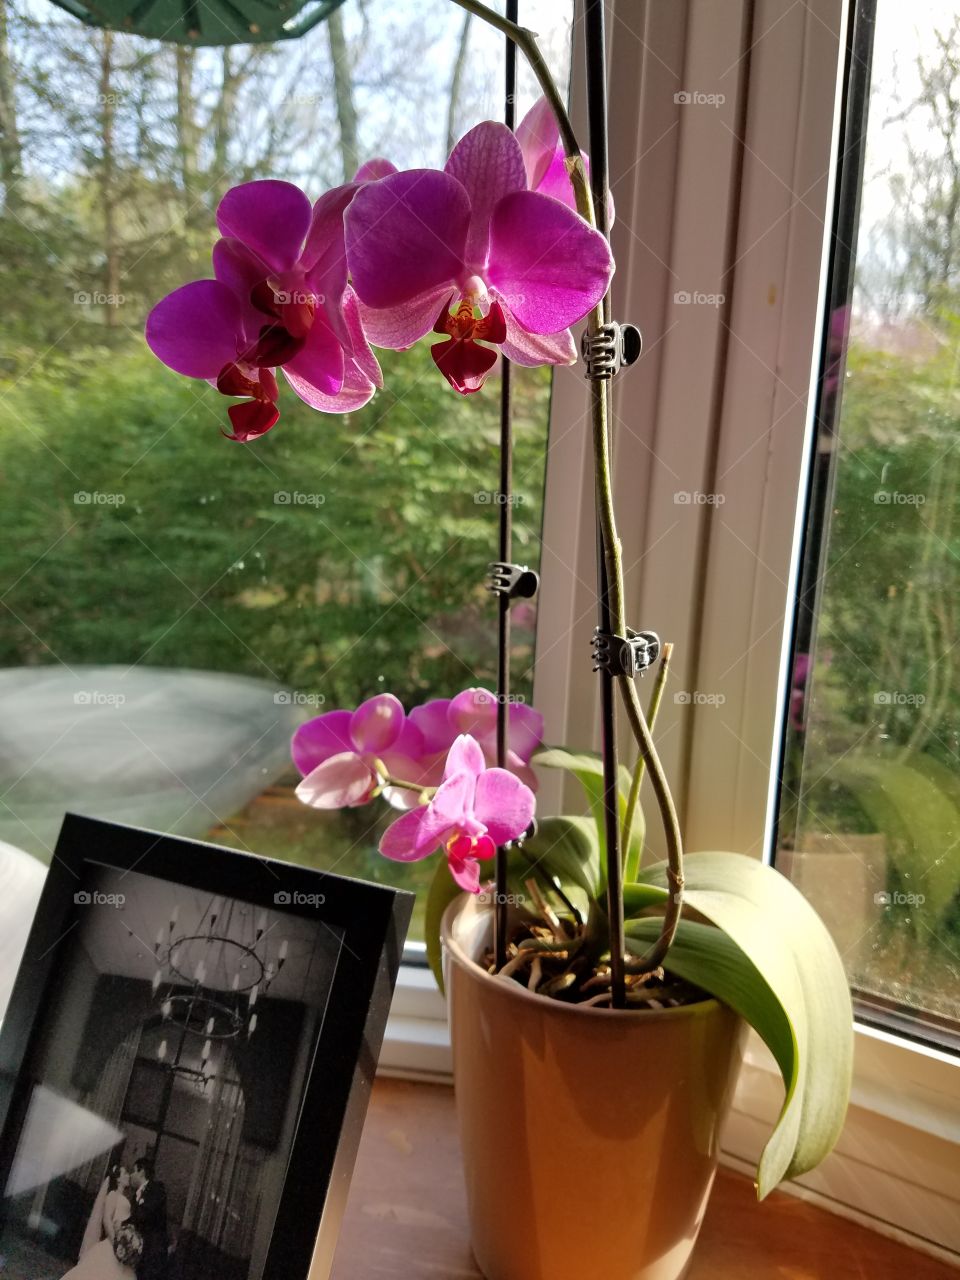 I love orchids